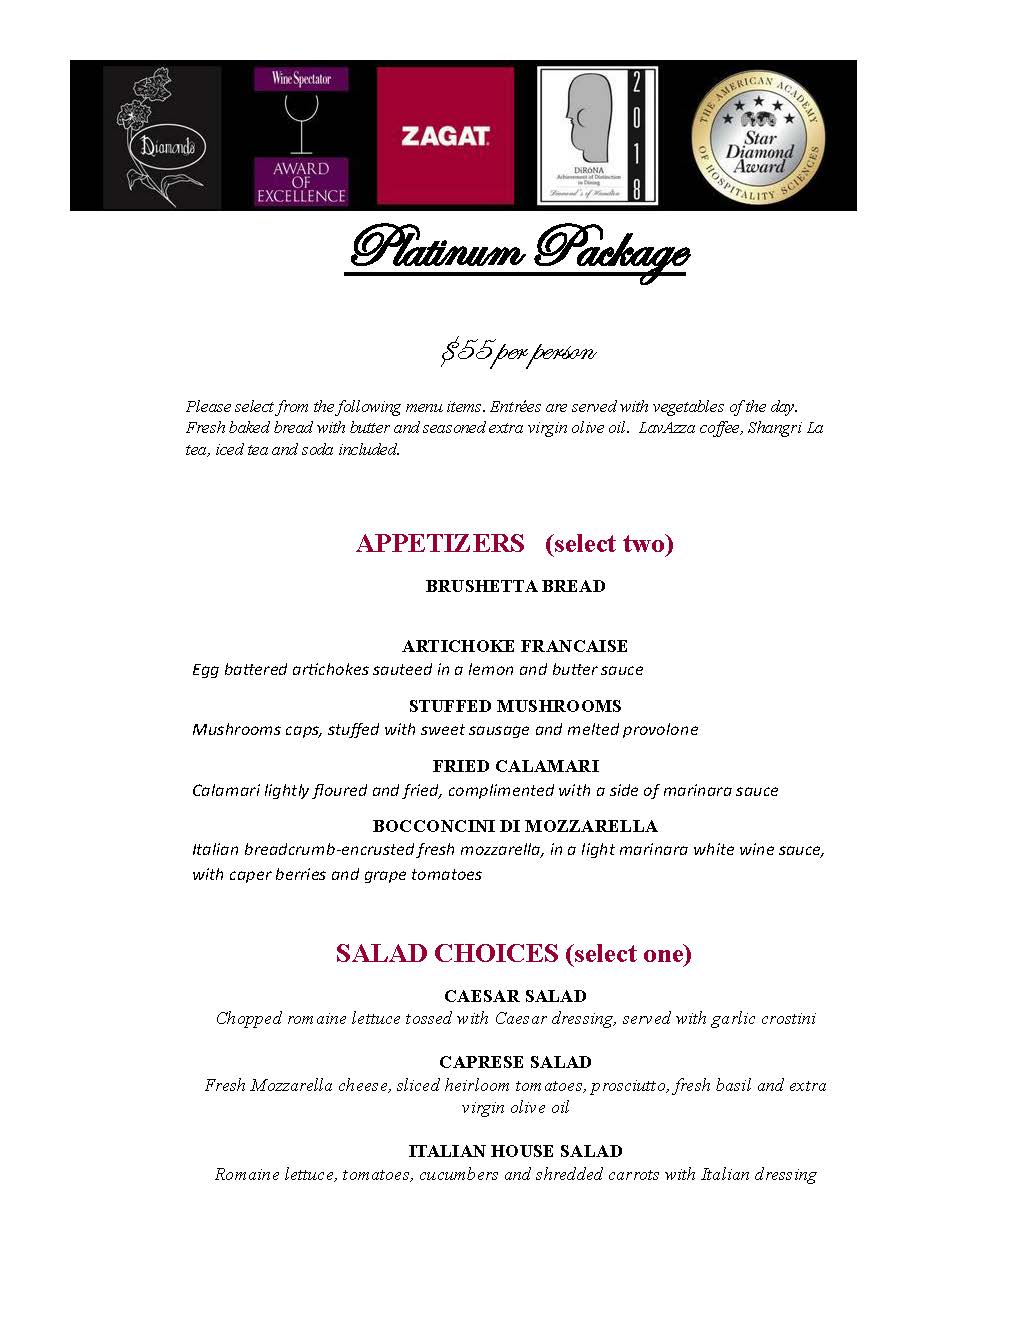 Menu page featuring logos of various awards at the top followed by meal selections including entrées, appetizers, and salads detailed with both dish names and included ingredients.